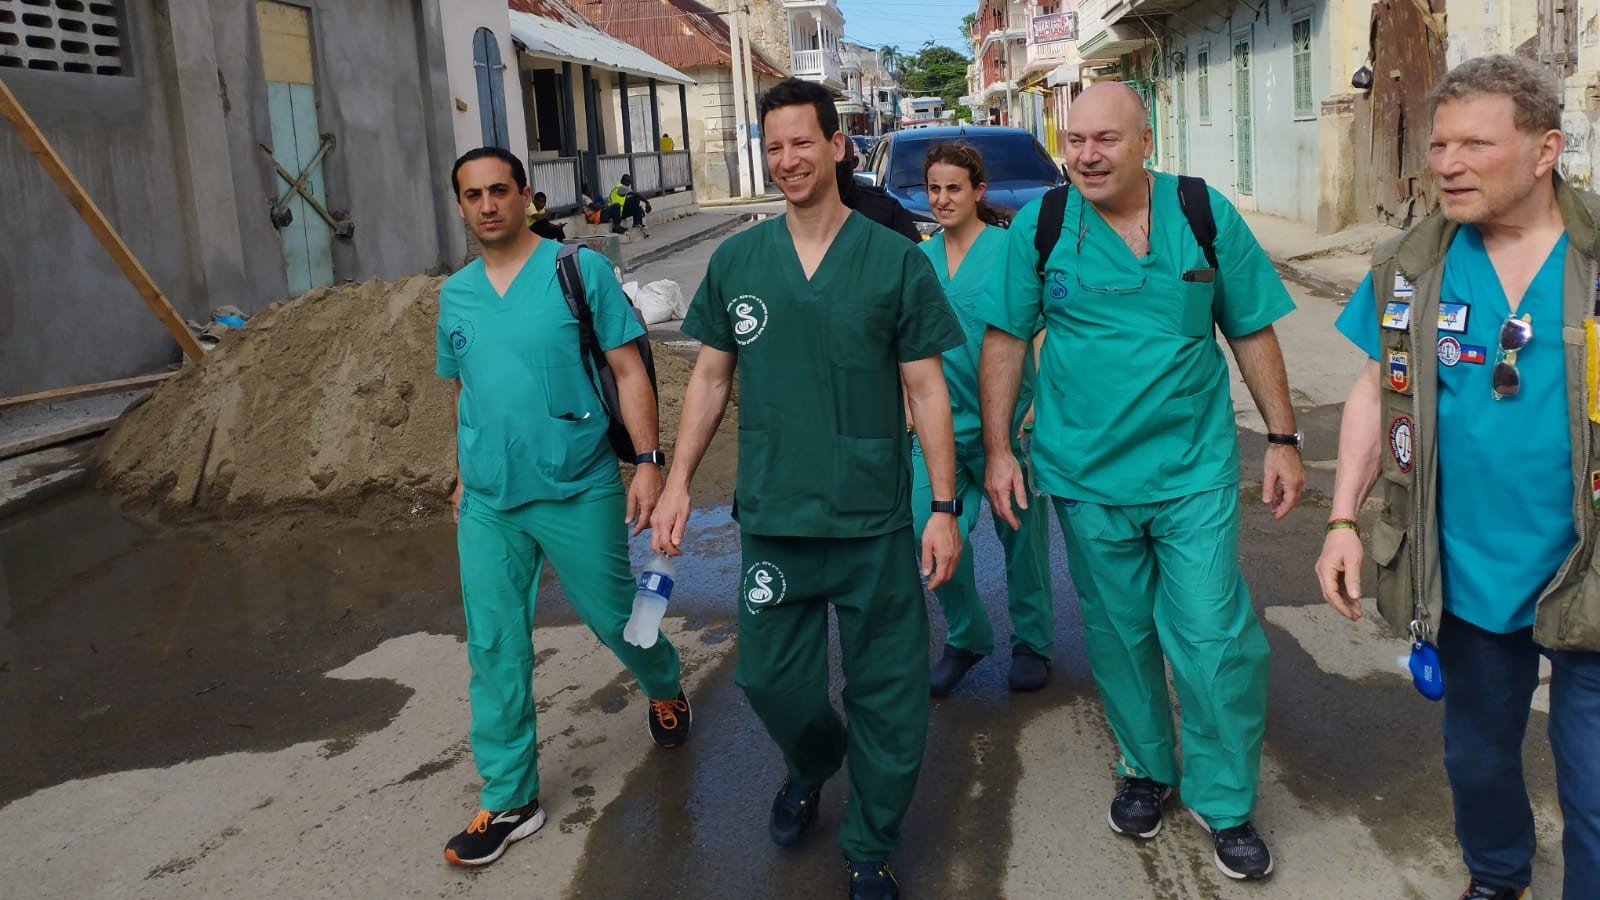 Sheba Medical Center burn experts arriving in Haiti. From far right is Sam Davis, founding director of the Burn Advocates Network (BAN), and to his right is Dr. Josef Haik, director of Israel’s National Burn Center at Sheba. (Sheba Medical Center)